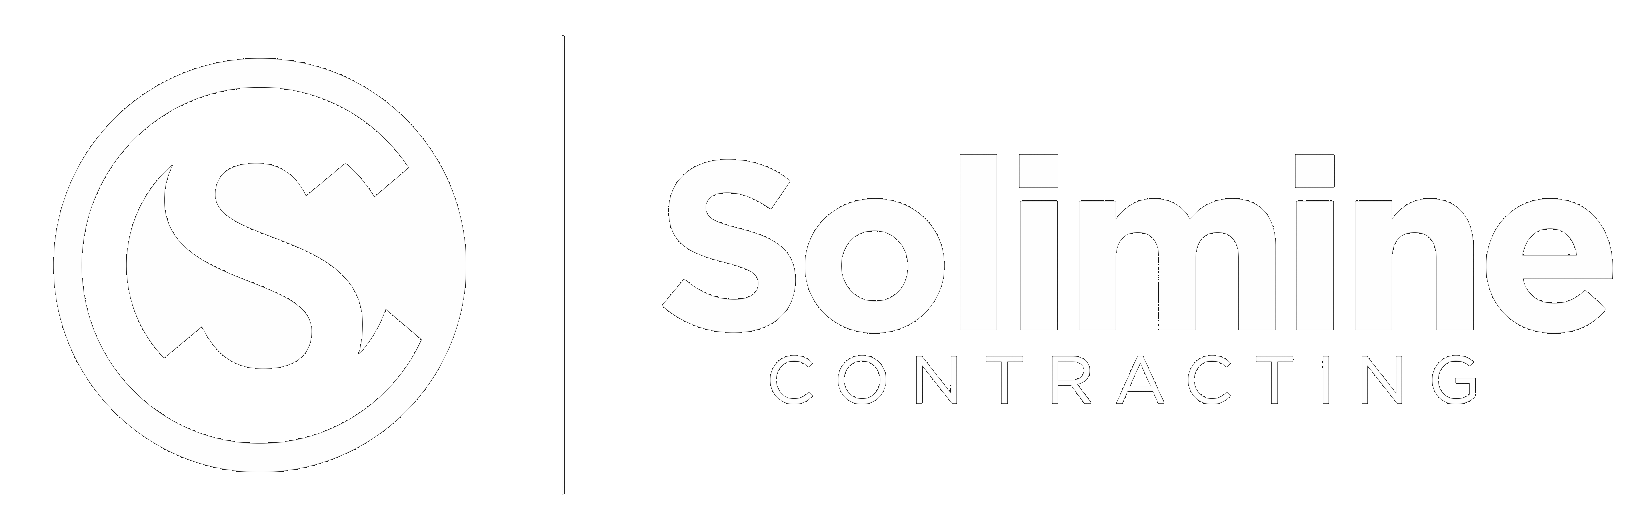 Solimine Contracting logo